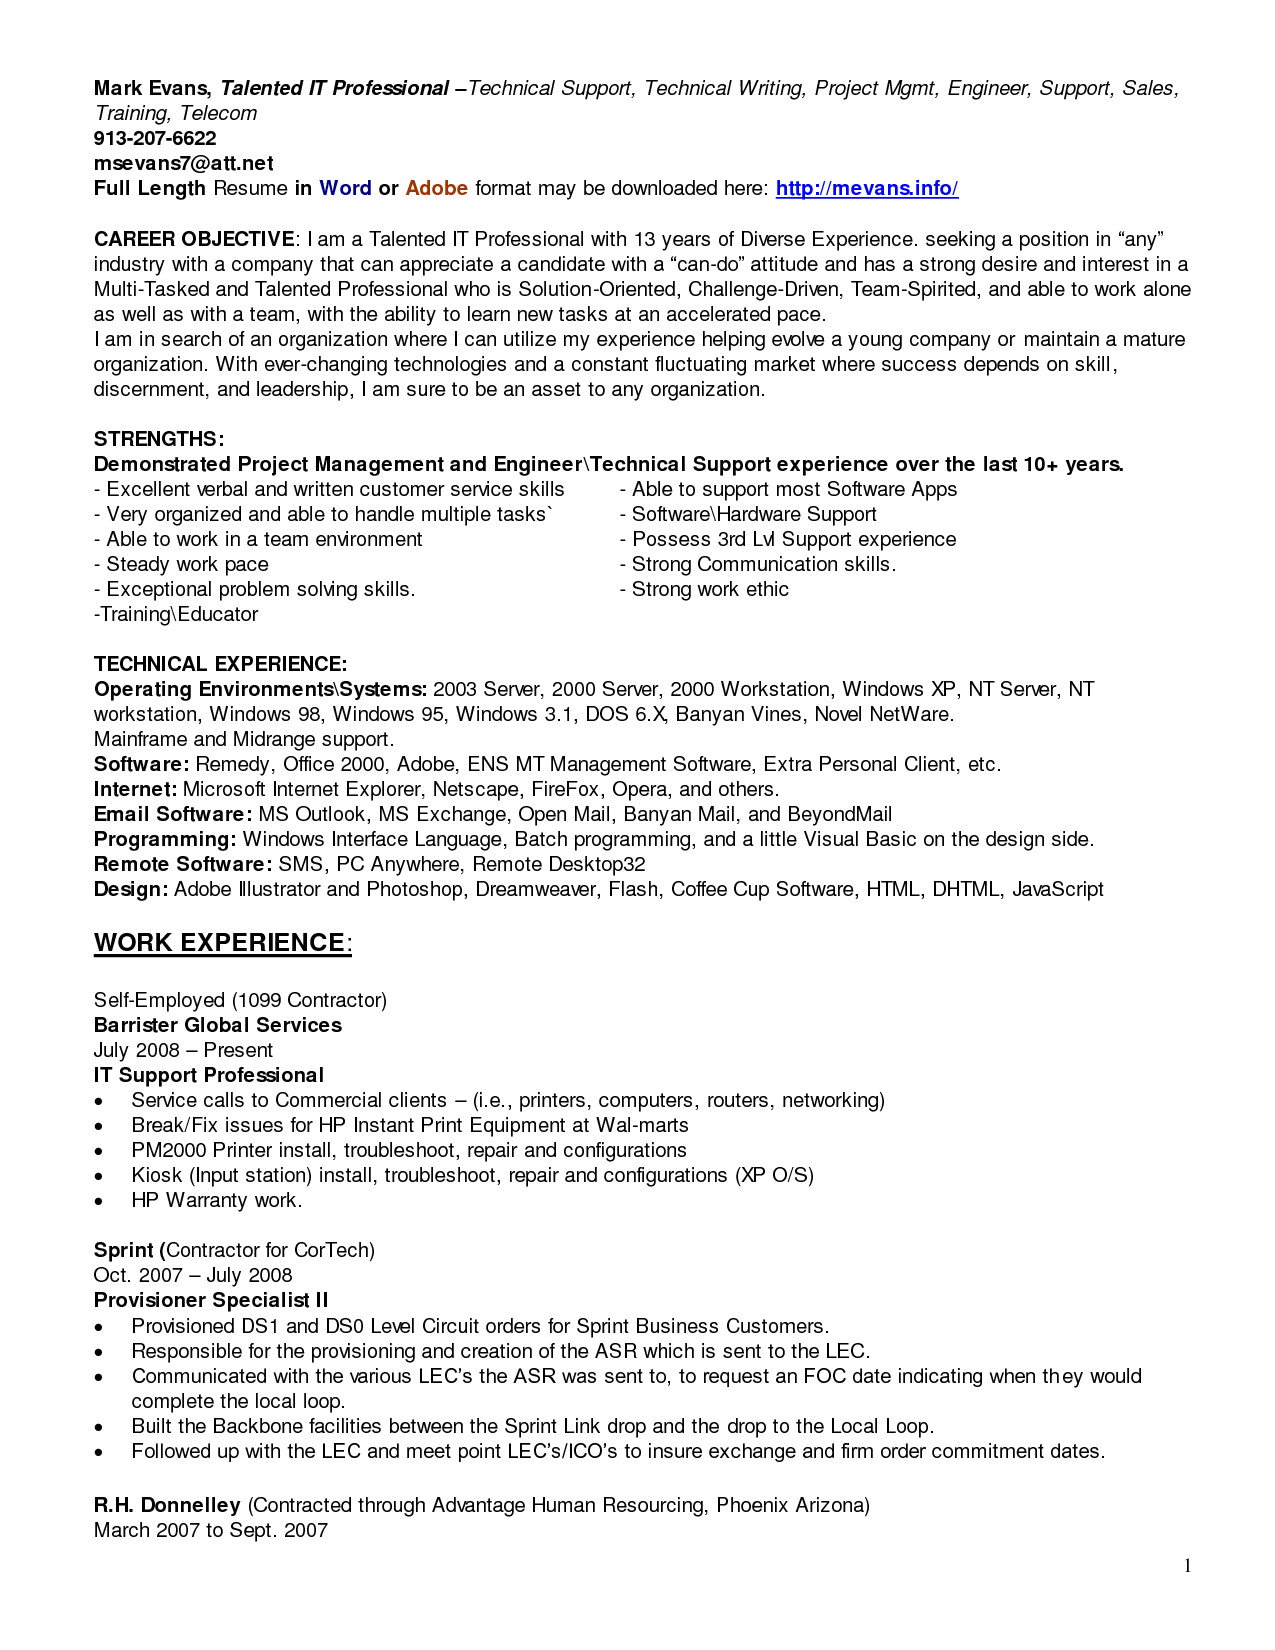 I Need Help with My Resume and Cover Letter I Need Help with My Resume and Cover Letter Resume Ideas